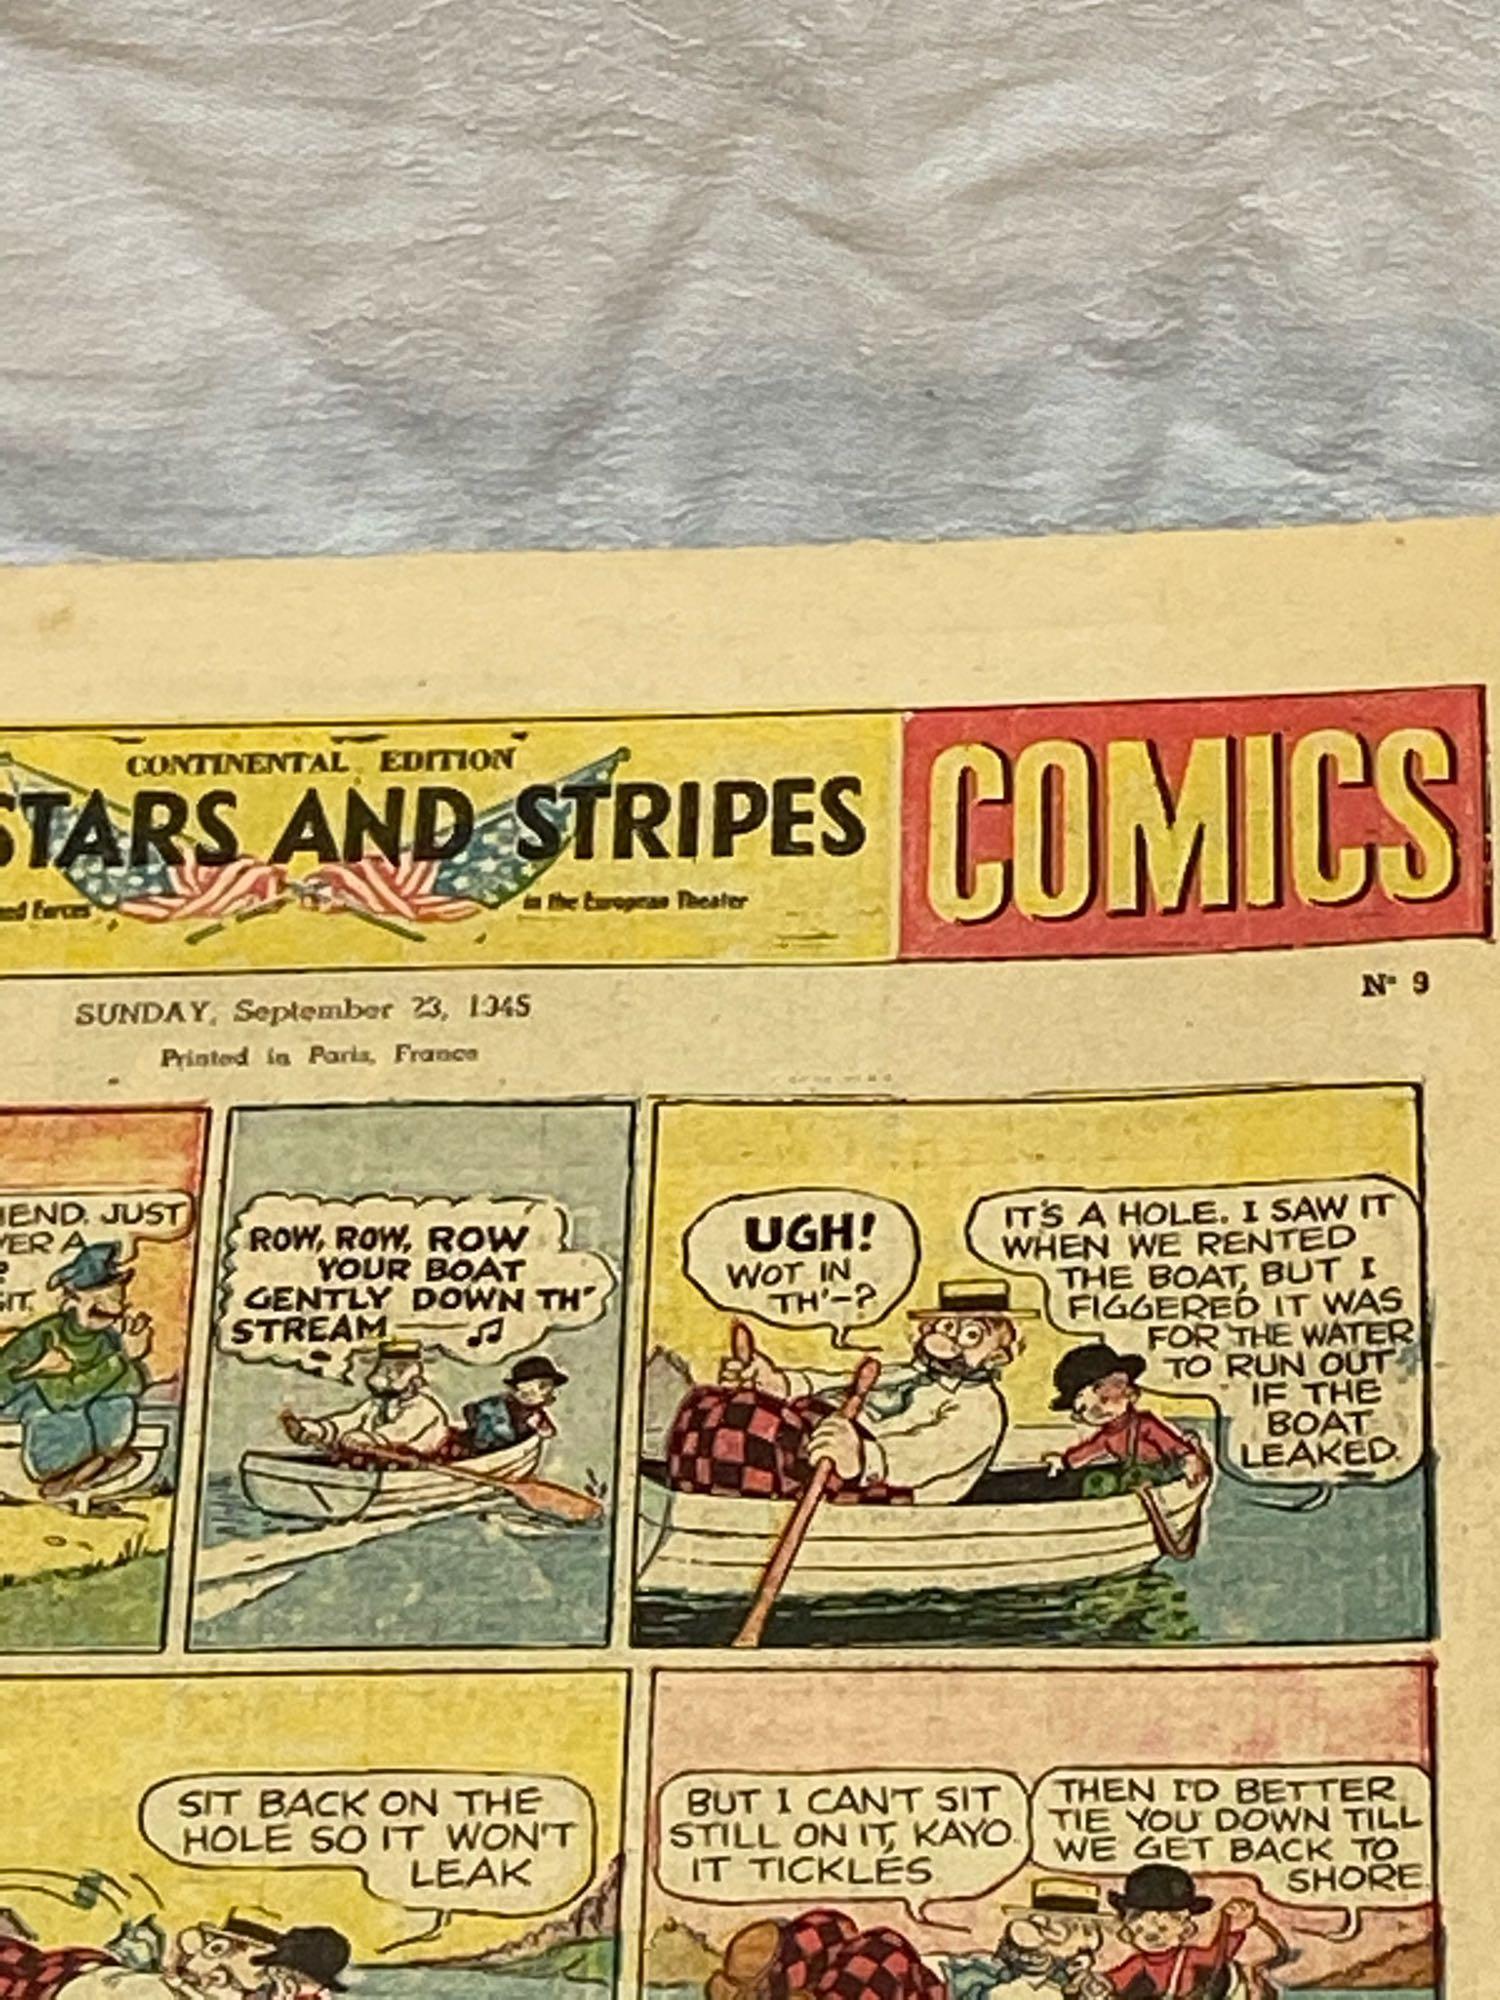 The Stars and Stripes 1940's Weekly Comics